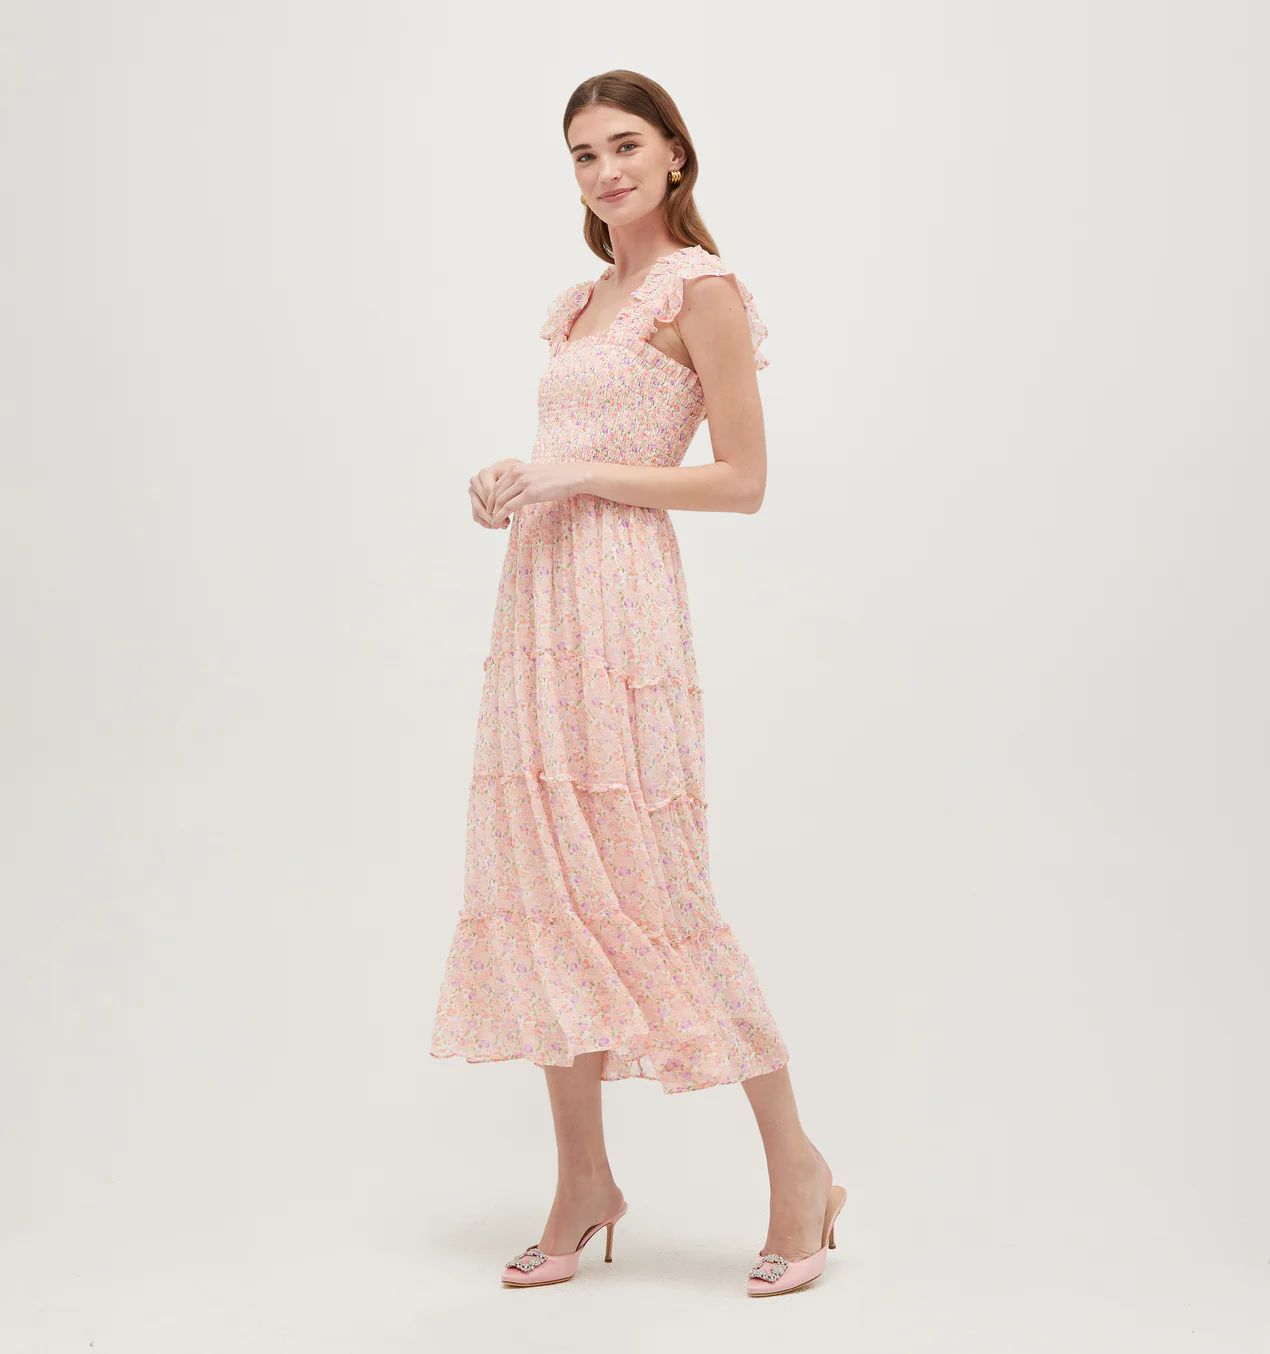 The Ellie Nap Dress - Coral Baroque Shell Cotton Sateen | Hill House Home